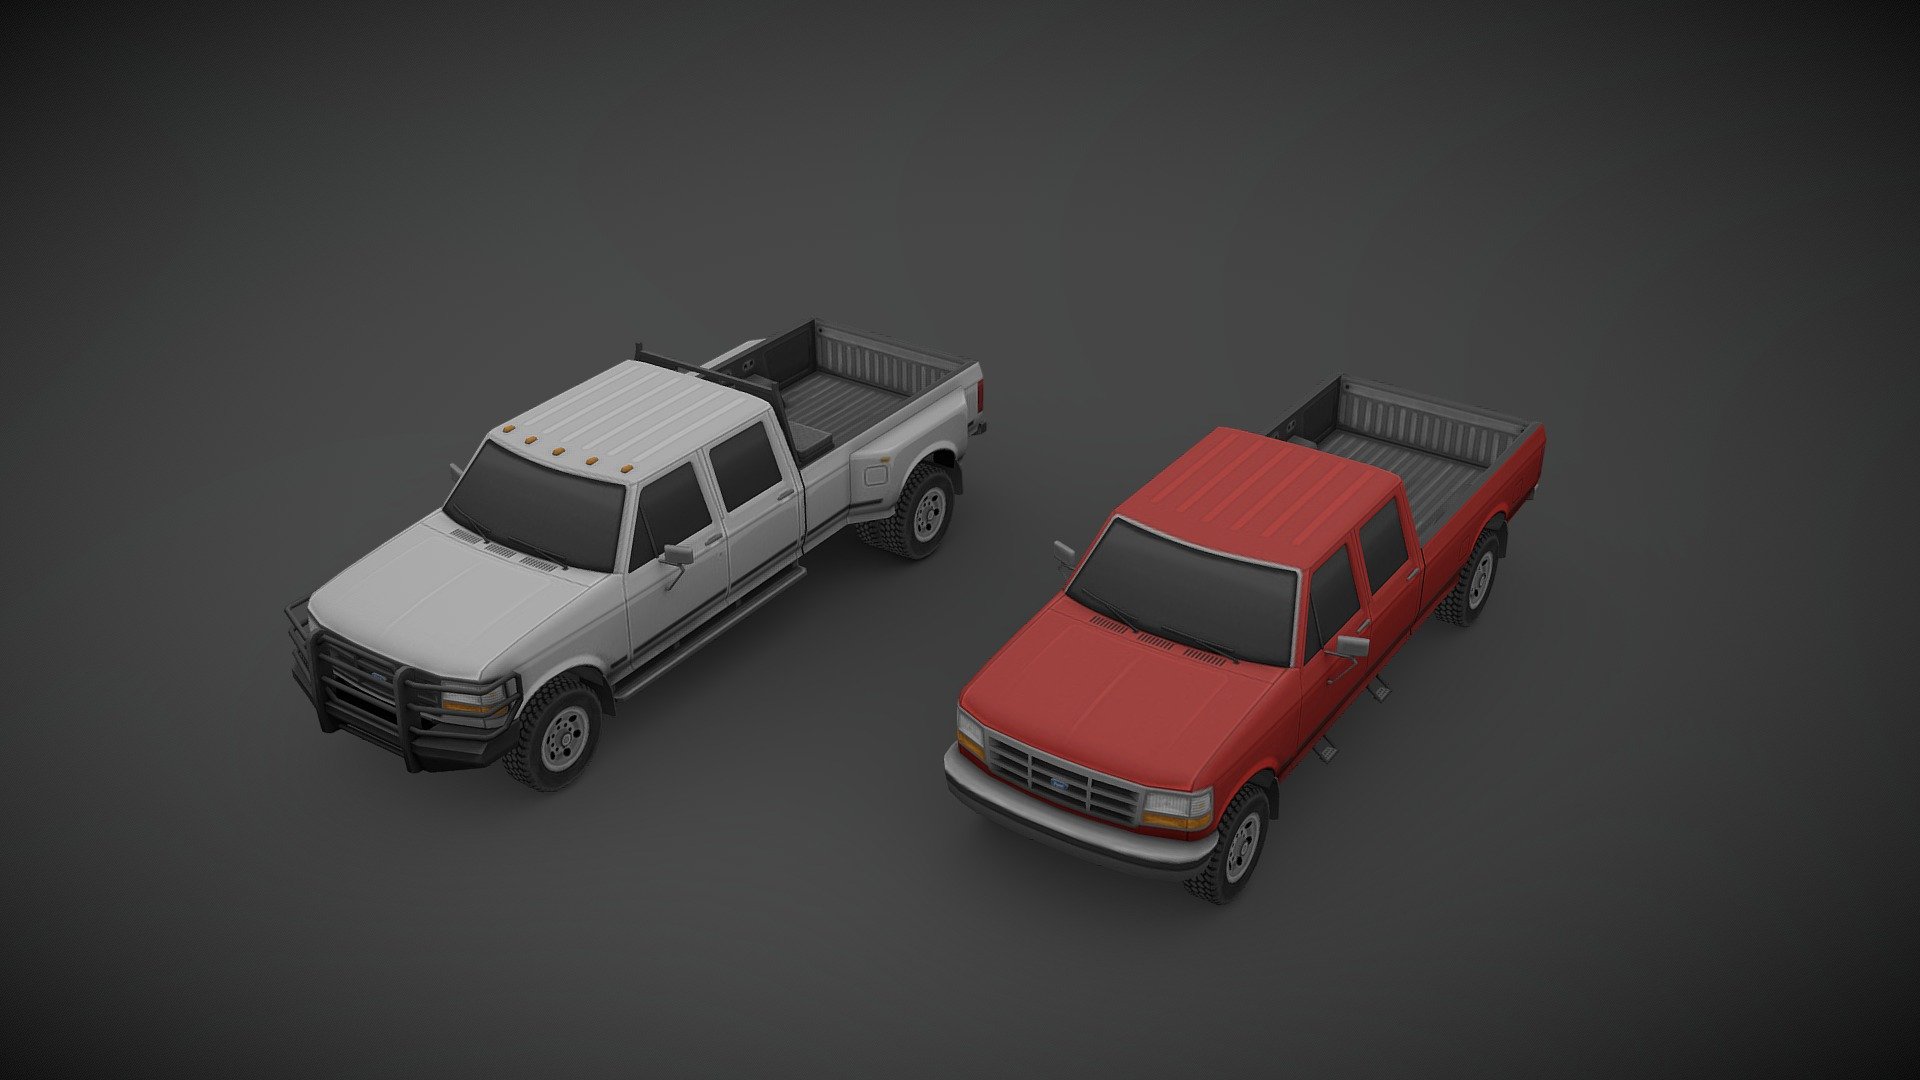 Showcase of a 1993 Ford F-350, I’ve made for project ZOMBOID, low poly but with a high detail texture, optimized for game engine. This version is not a 100% true to the original since there are some compromises I’ve had to make to present it here.

You can find the actual version in project ZOMBOID STEAM Workshop 3d model